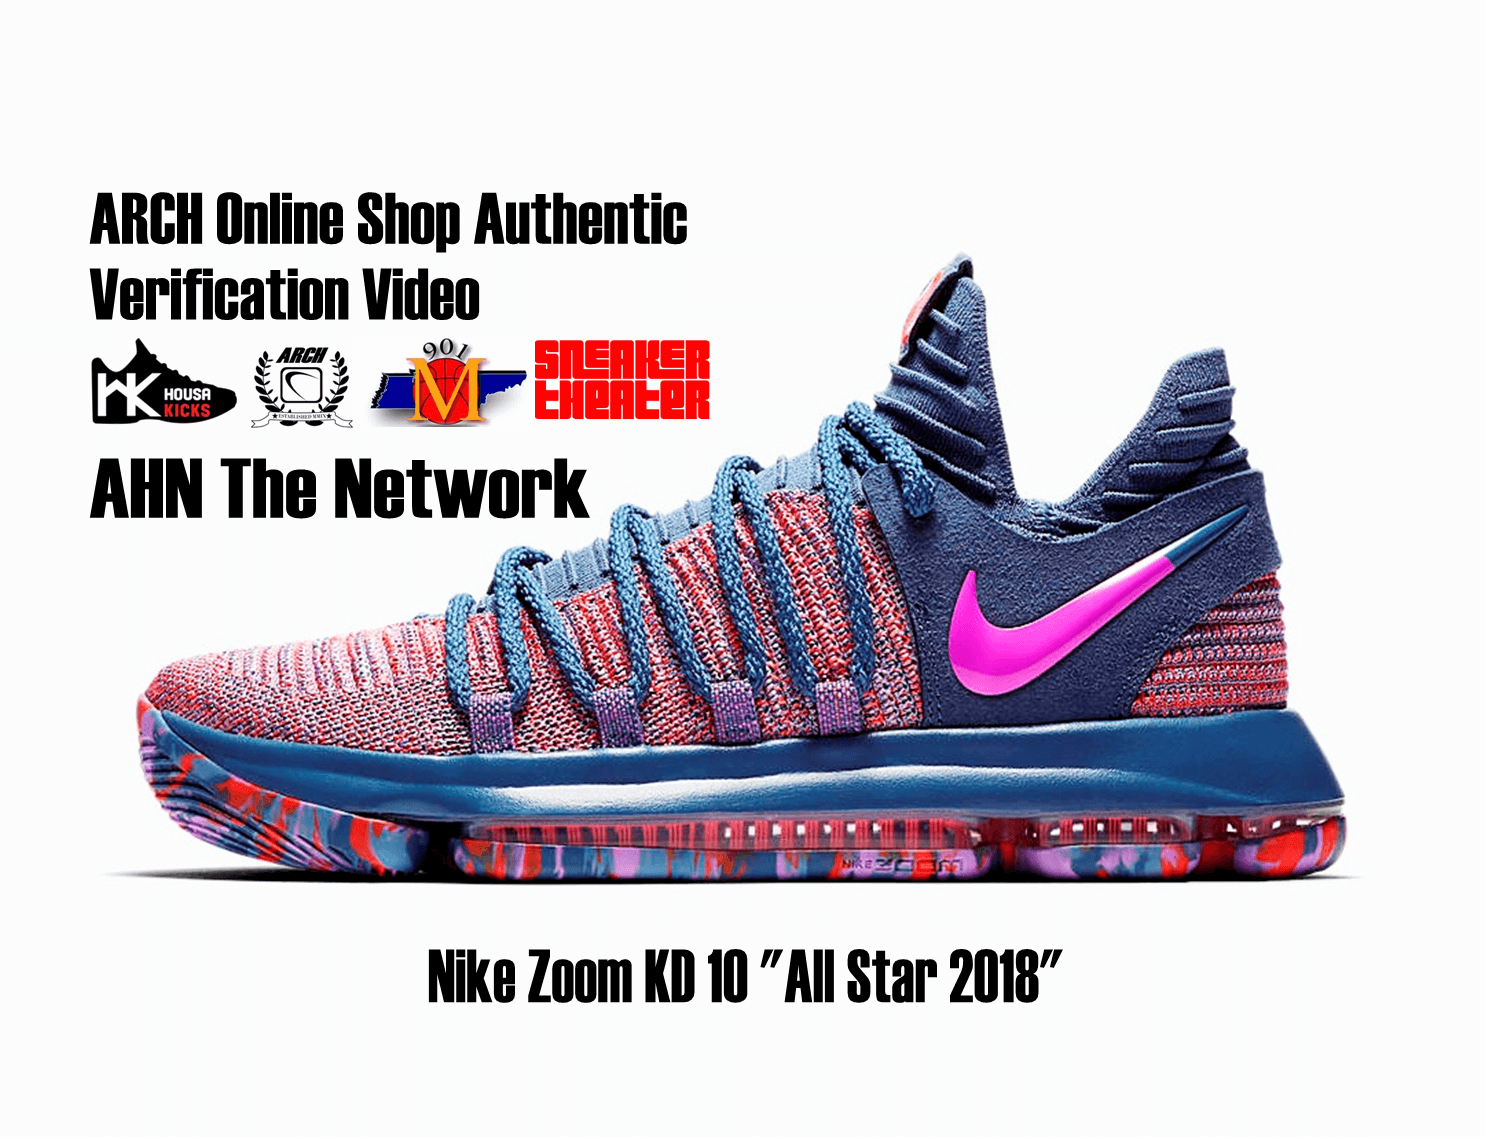 Geometría Medicina Forense Tranquilidad Nike Zoom KD 10 “All Star 2018” | Authentic Verification – ARCH-USA